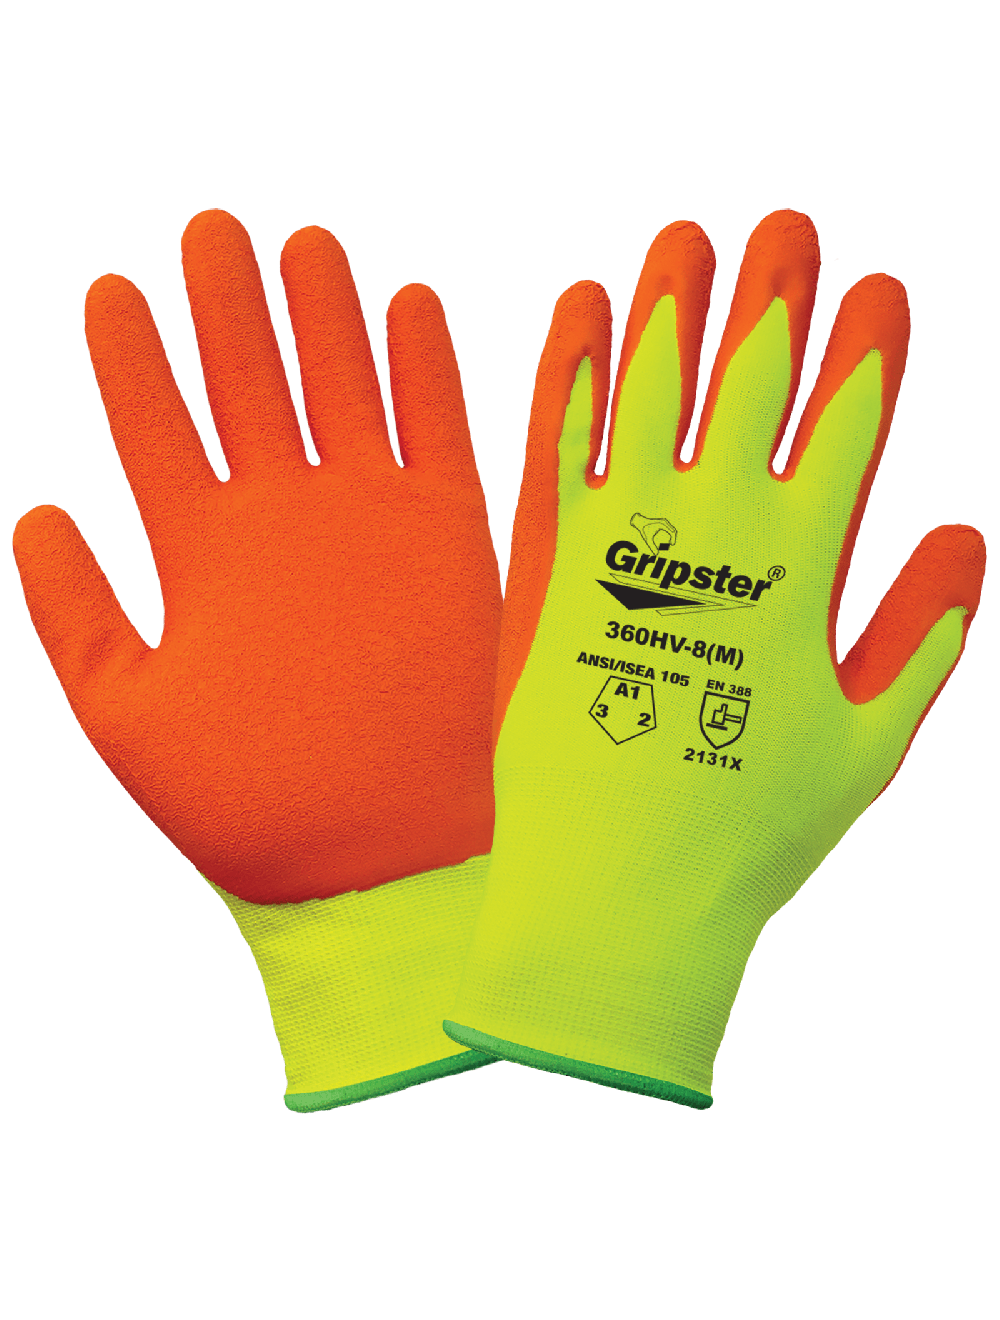 Red Steer® Chilly Grip® Gray, Water Resistant, Palm Coated Glove : Palm  Coated Gloves